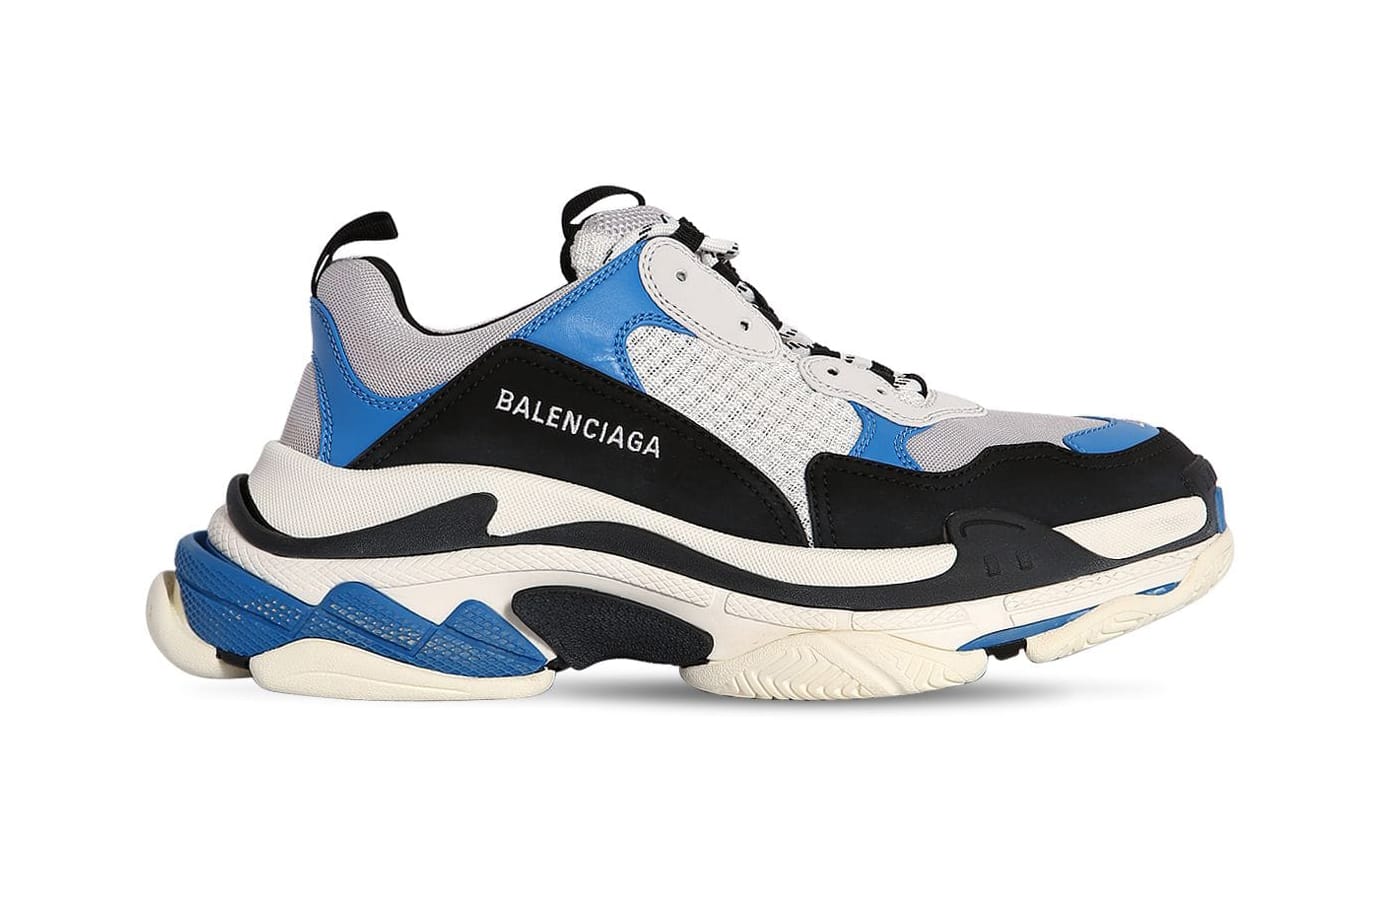 Balenciaga Grey And Fluorescent Triple S Sneakers in 2019